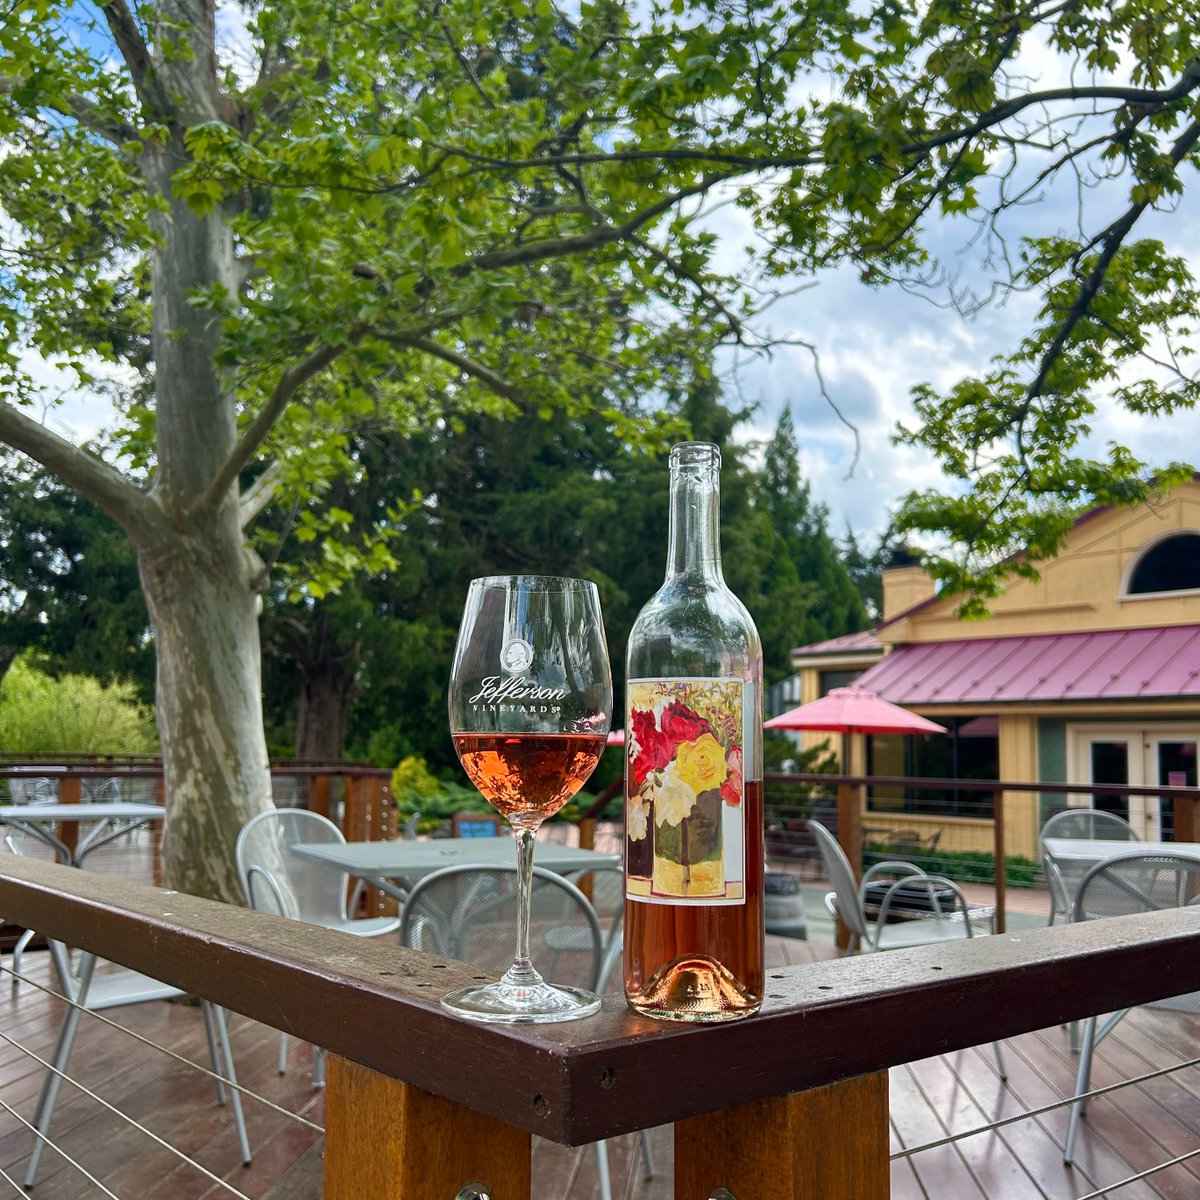 Sip, savor, and celebrate at Jefferson Vineyards this weekend!🍷🌅 Stop by this Sunday to enjoy their Rosé for $15 per bottle or $5 per glass and live music from 2-4 pm! See details: bit.ly/4dBPrgw